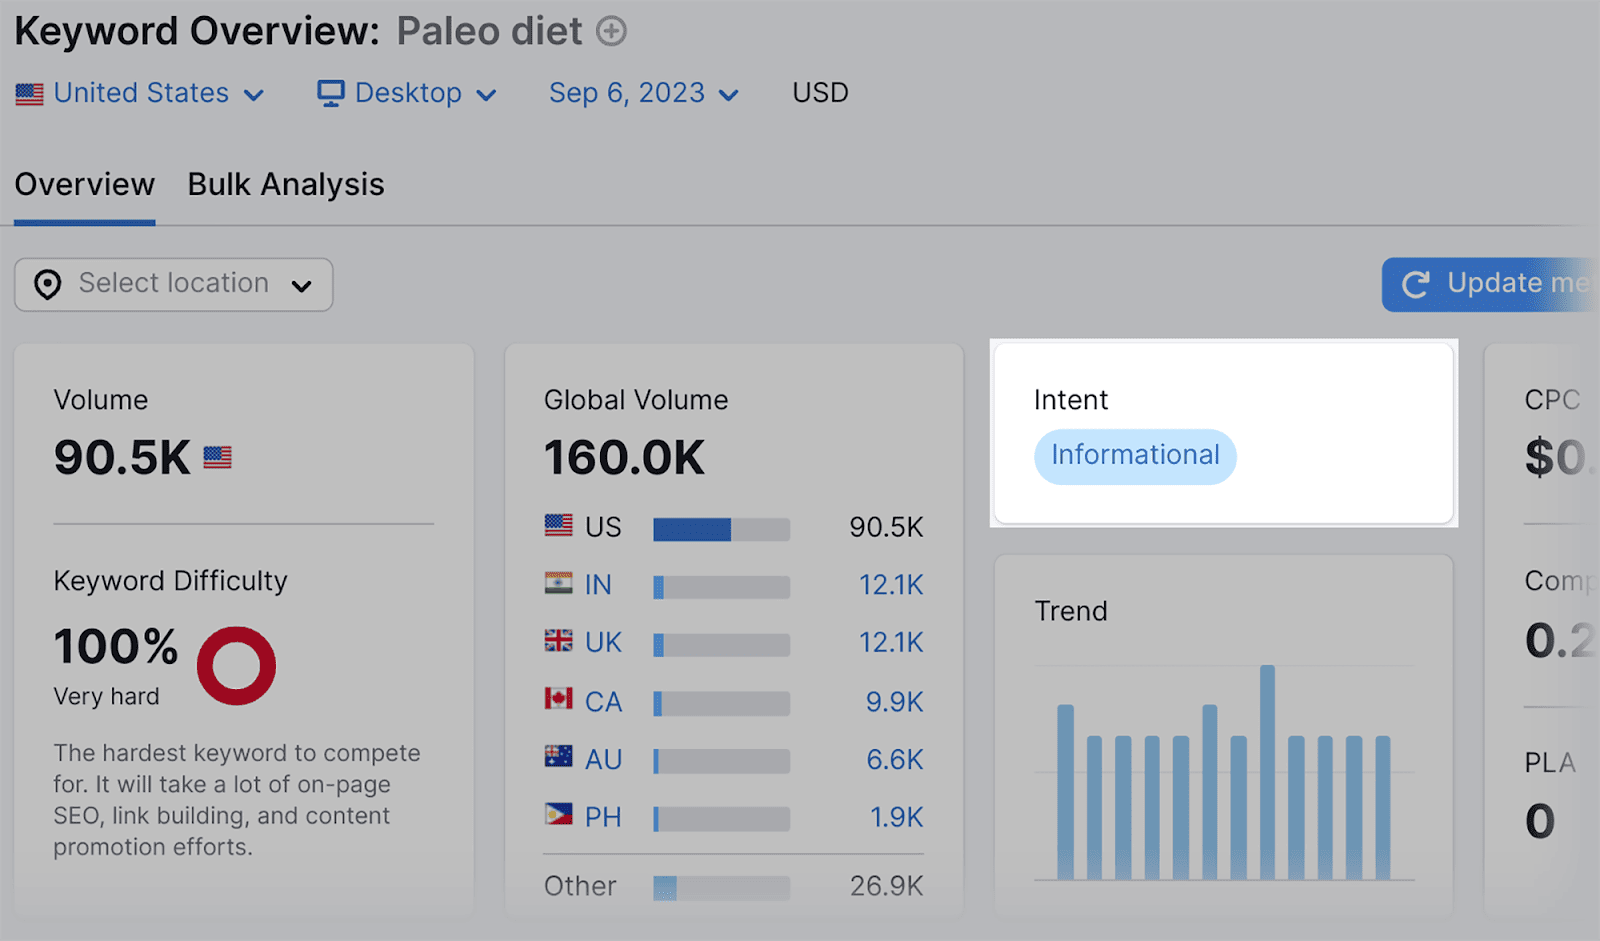 Paleo Diet keyword overview including search intent